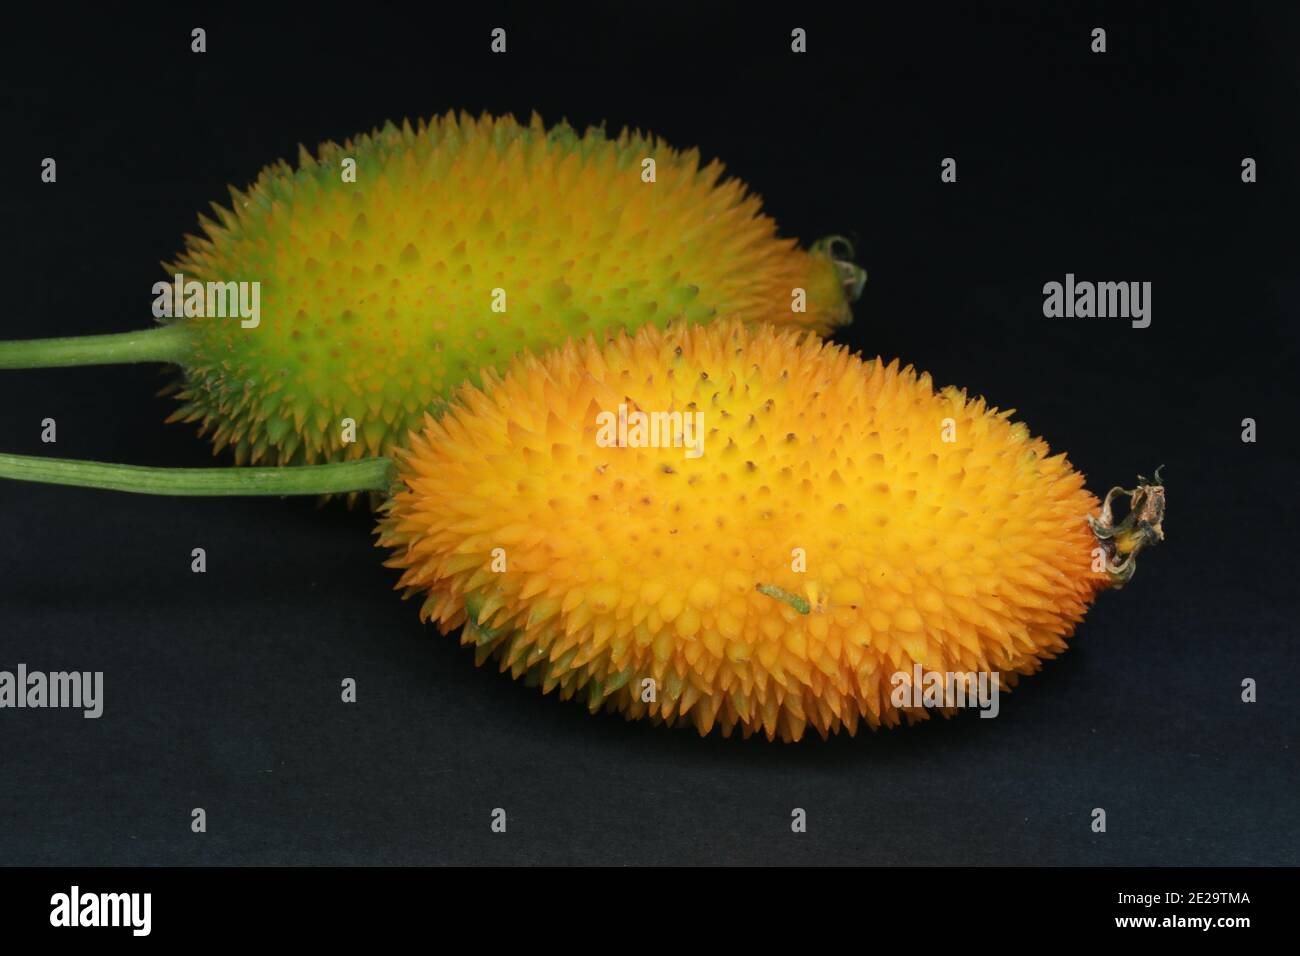 Hairy Bitter Gourd, Momordica dioica, Stock Photo